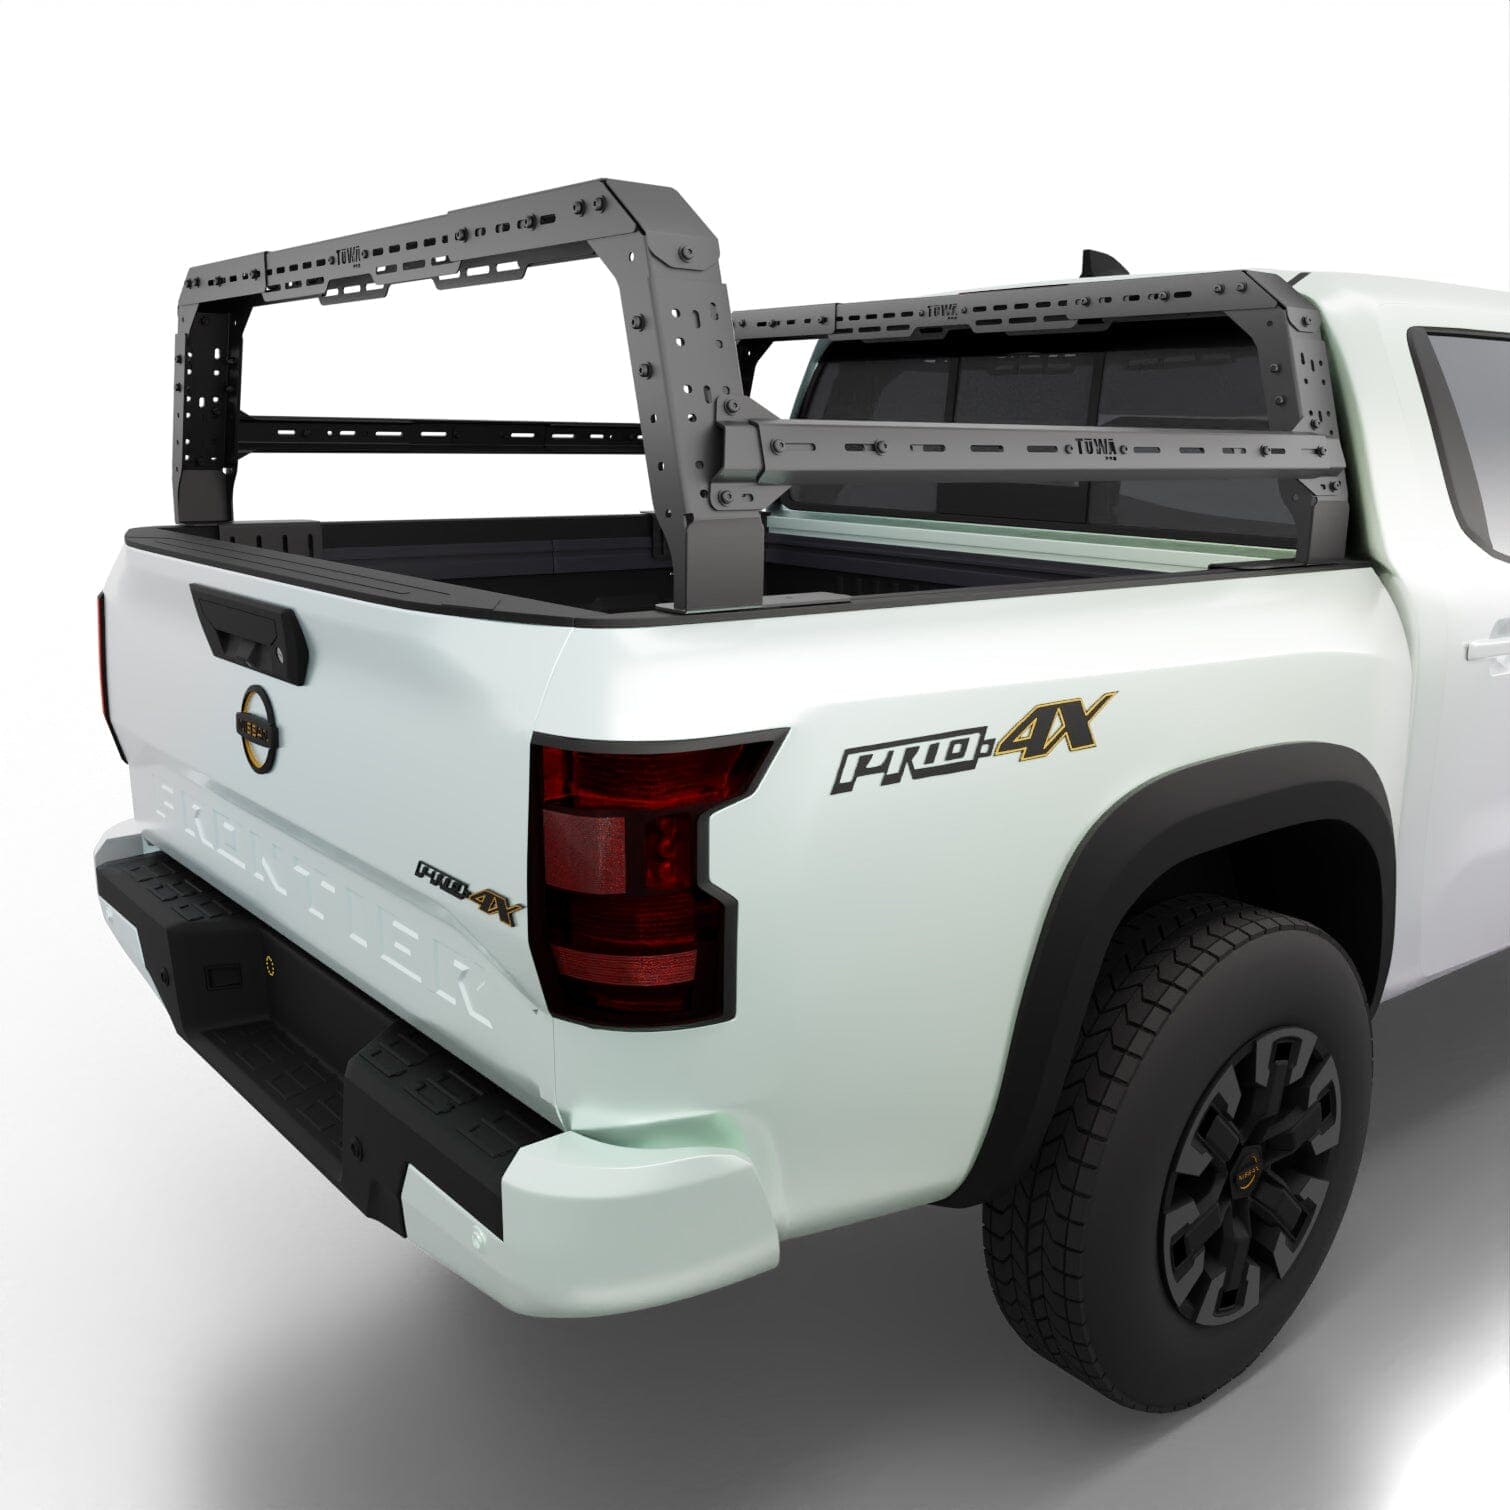 Nissan Frontier 4CX Series Shiprock Height Adjustable Bed Rack Truck Bed Cargo Rack System TUWA PRO®️ rear corner view installed on white background